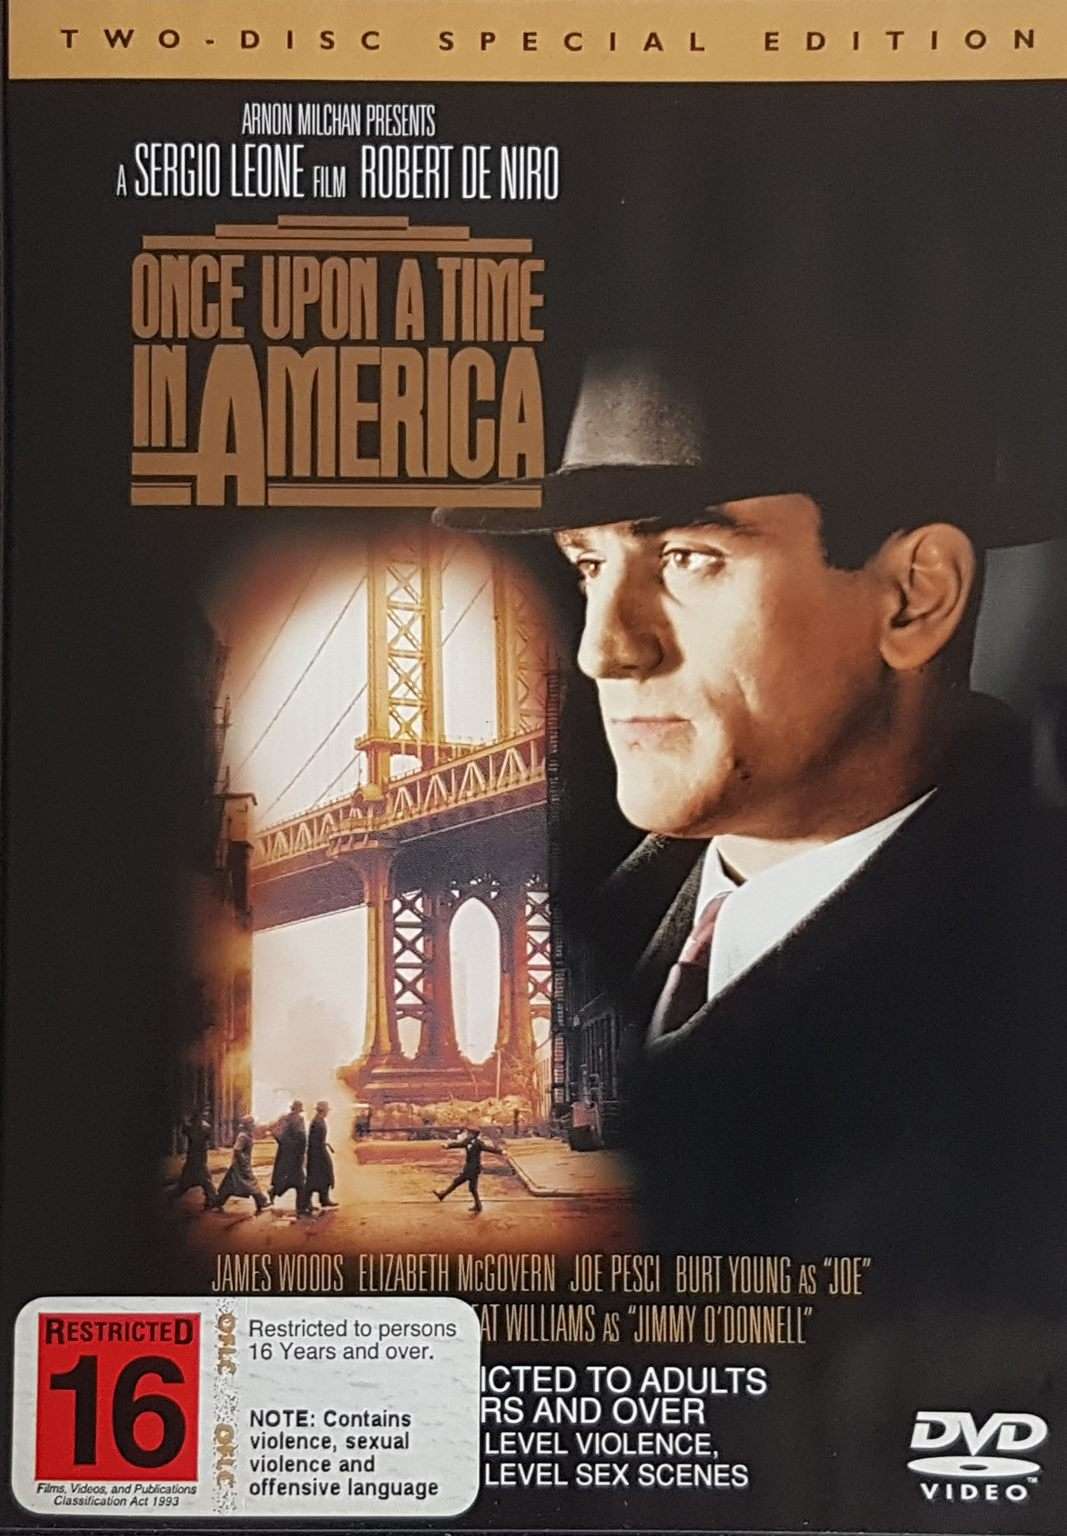 Once Upon a Time in America - Two Disc Special Edition